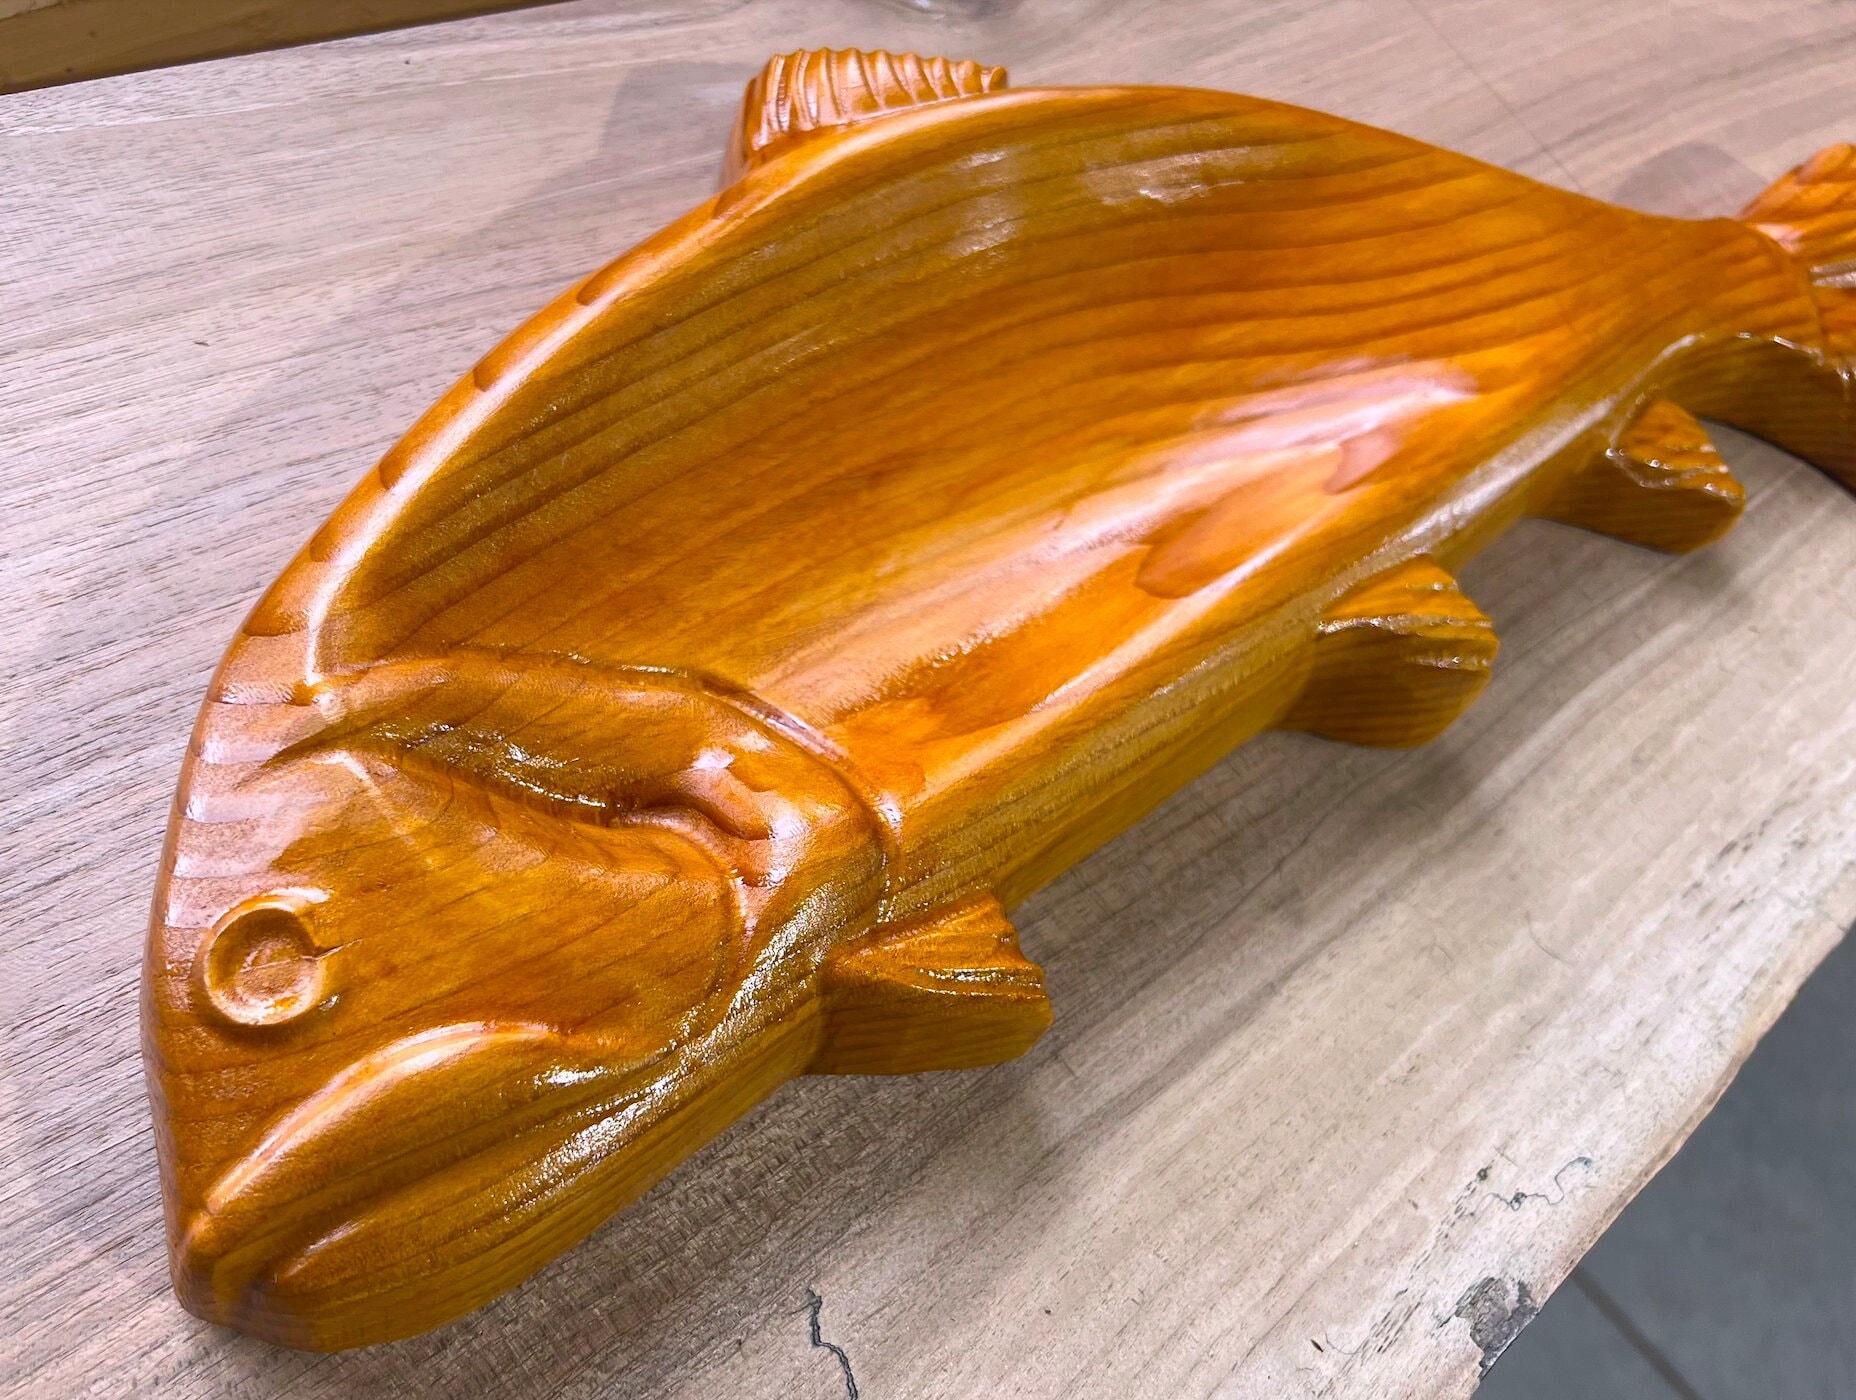 Incredible Douglas Fir Trout Carving, Fish Carving, Serving